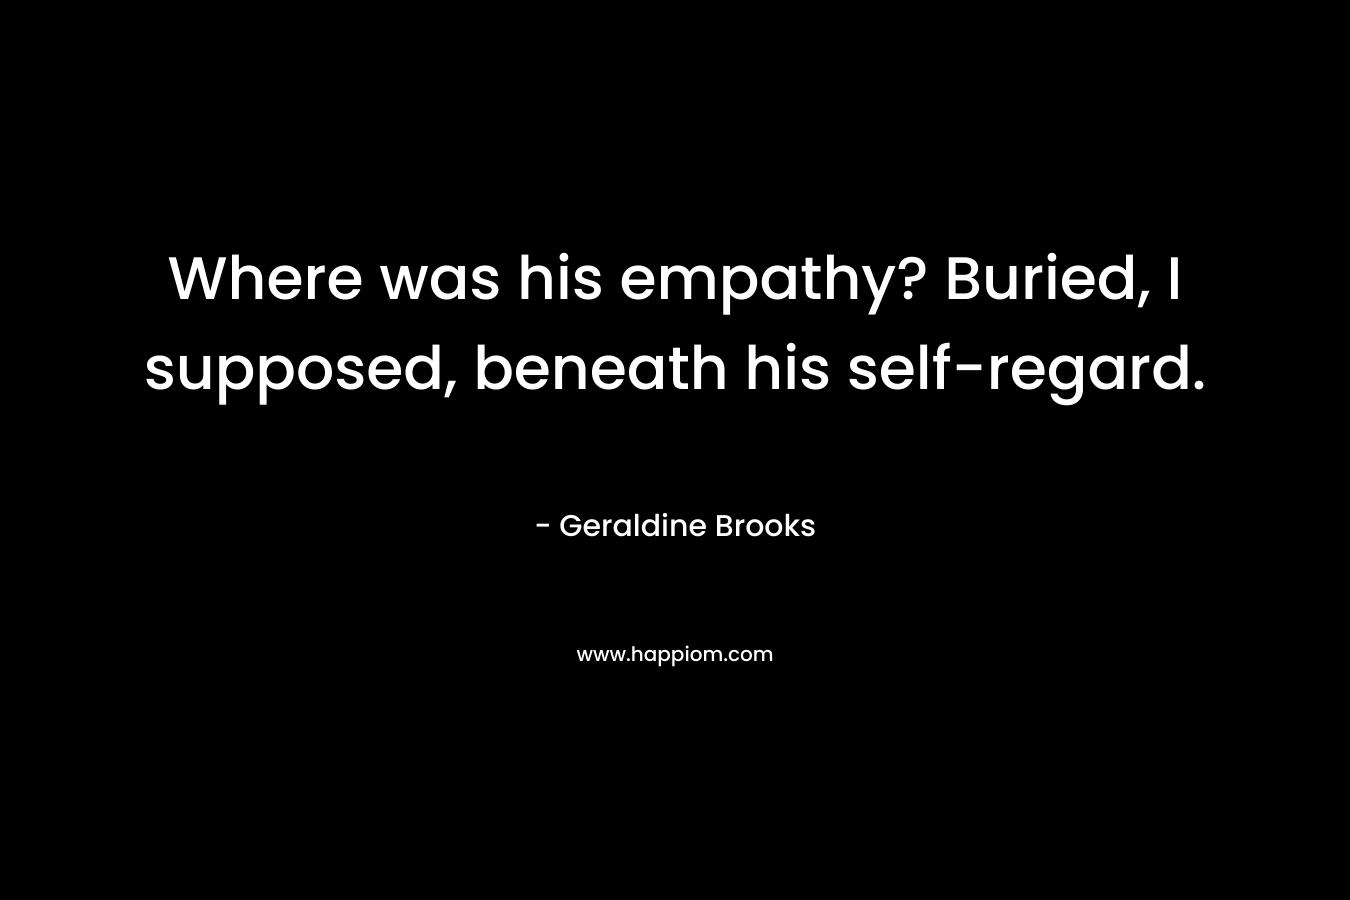 Where was his empathy? Buried, I supposed, beneath his self-regard.